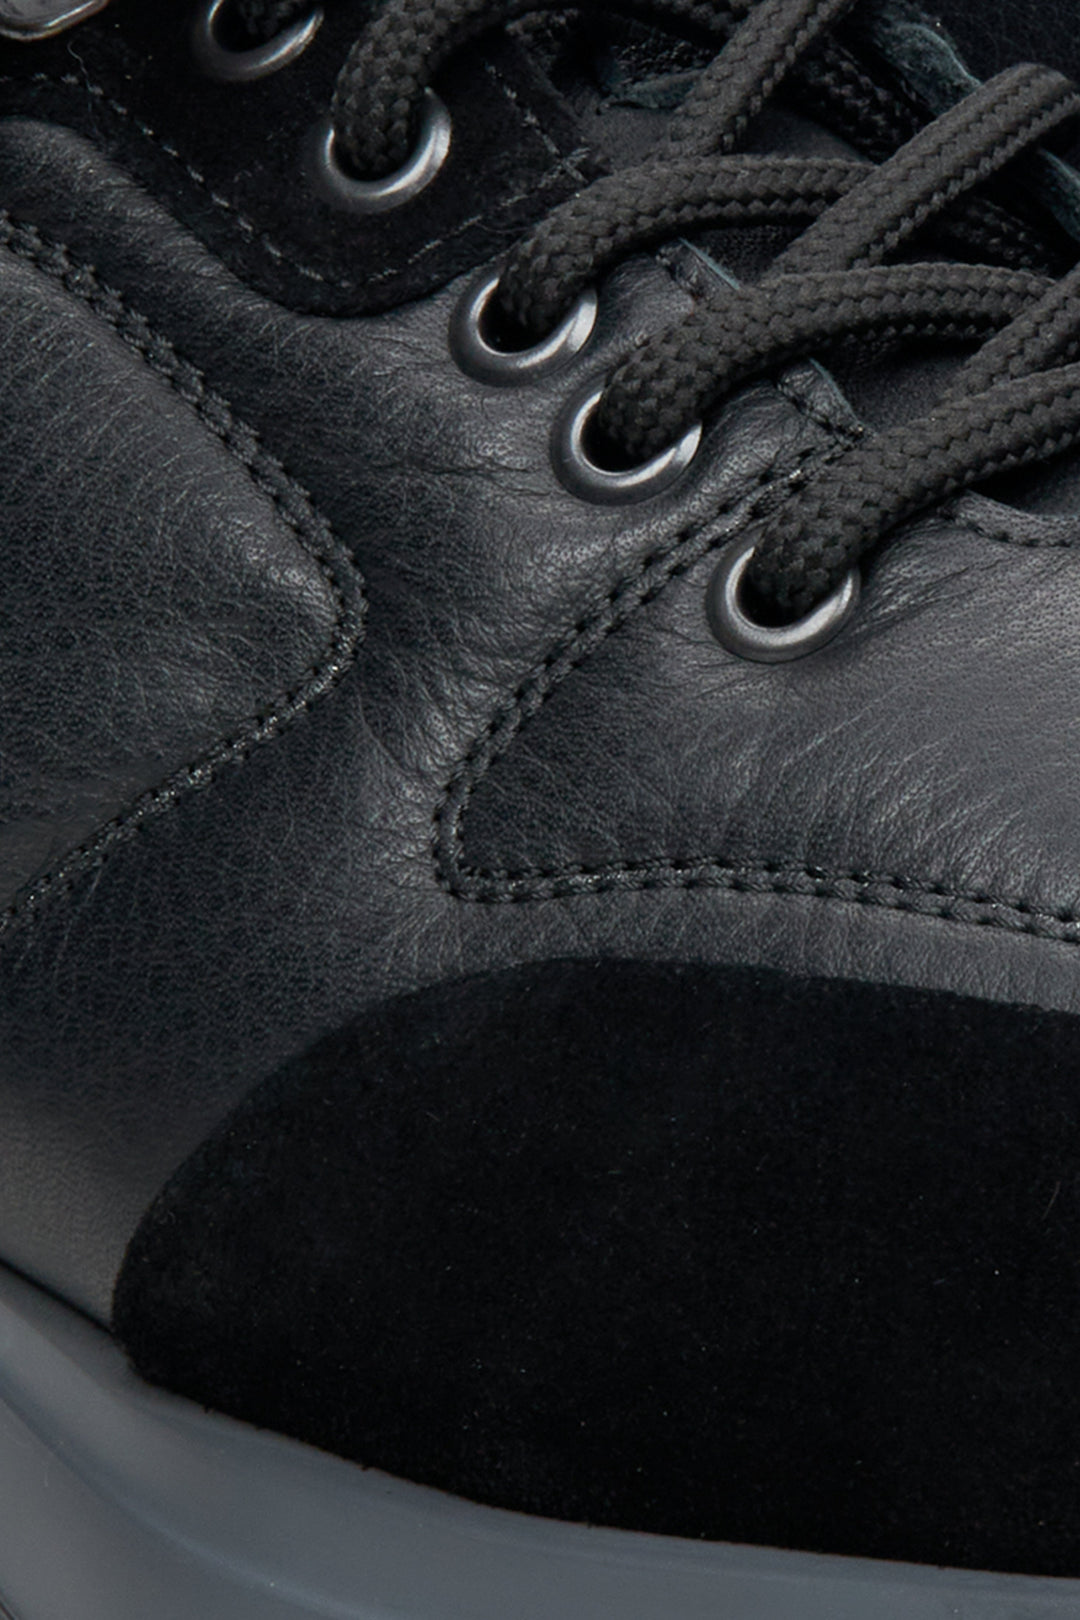 Low-cut men's athletic sneakers in black with suede and leather by Estro - close-up on the details.